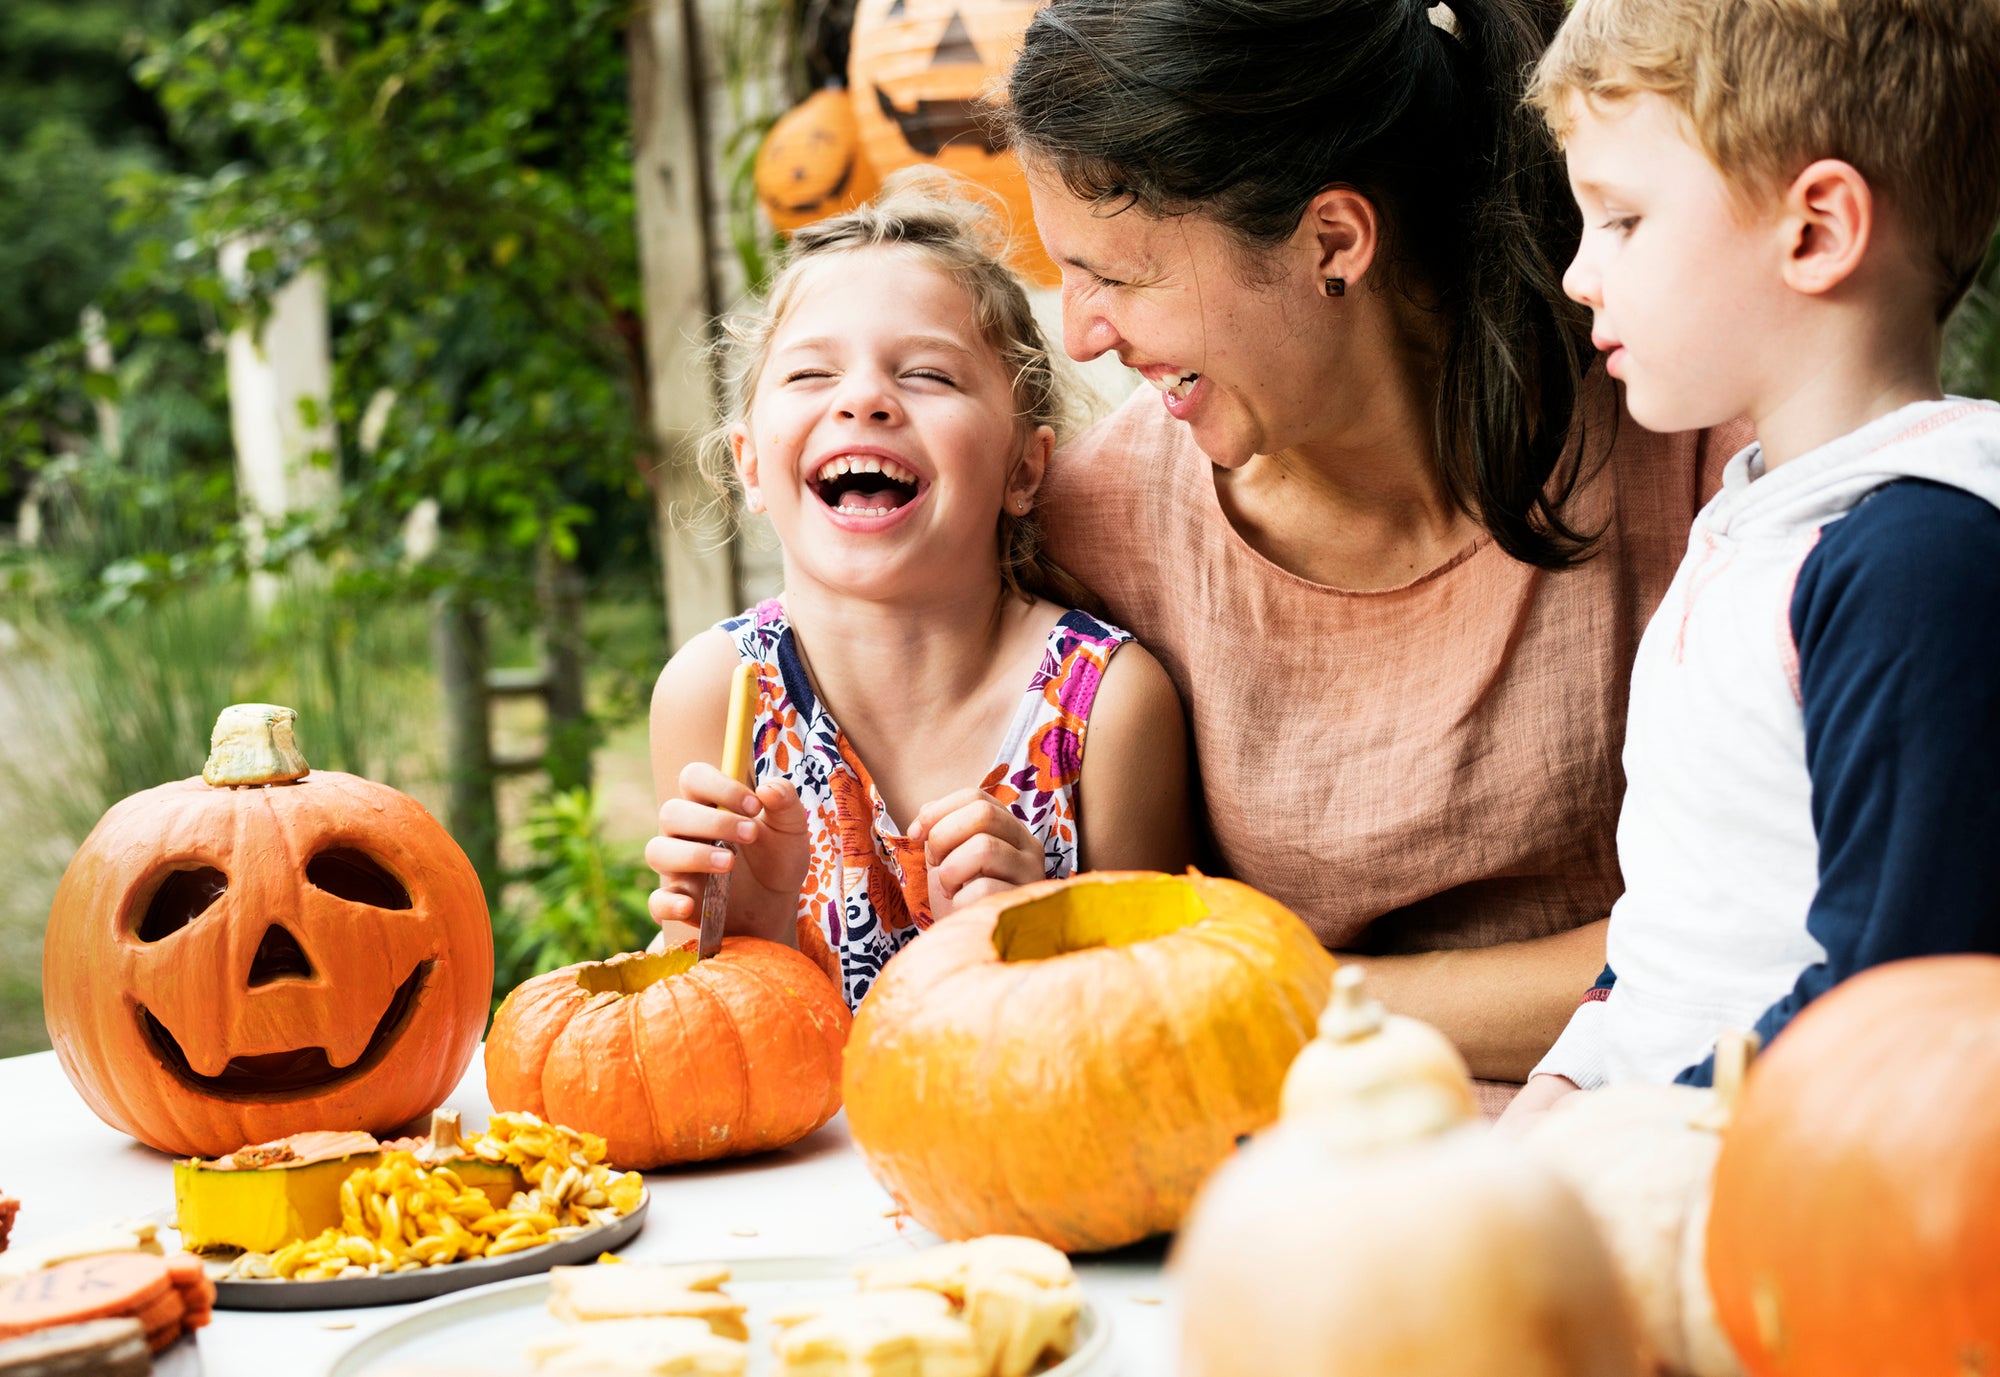 Two younger children and their mother enjoying gut-healthy Halloween treats while carving pumpkins.